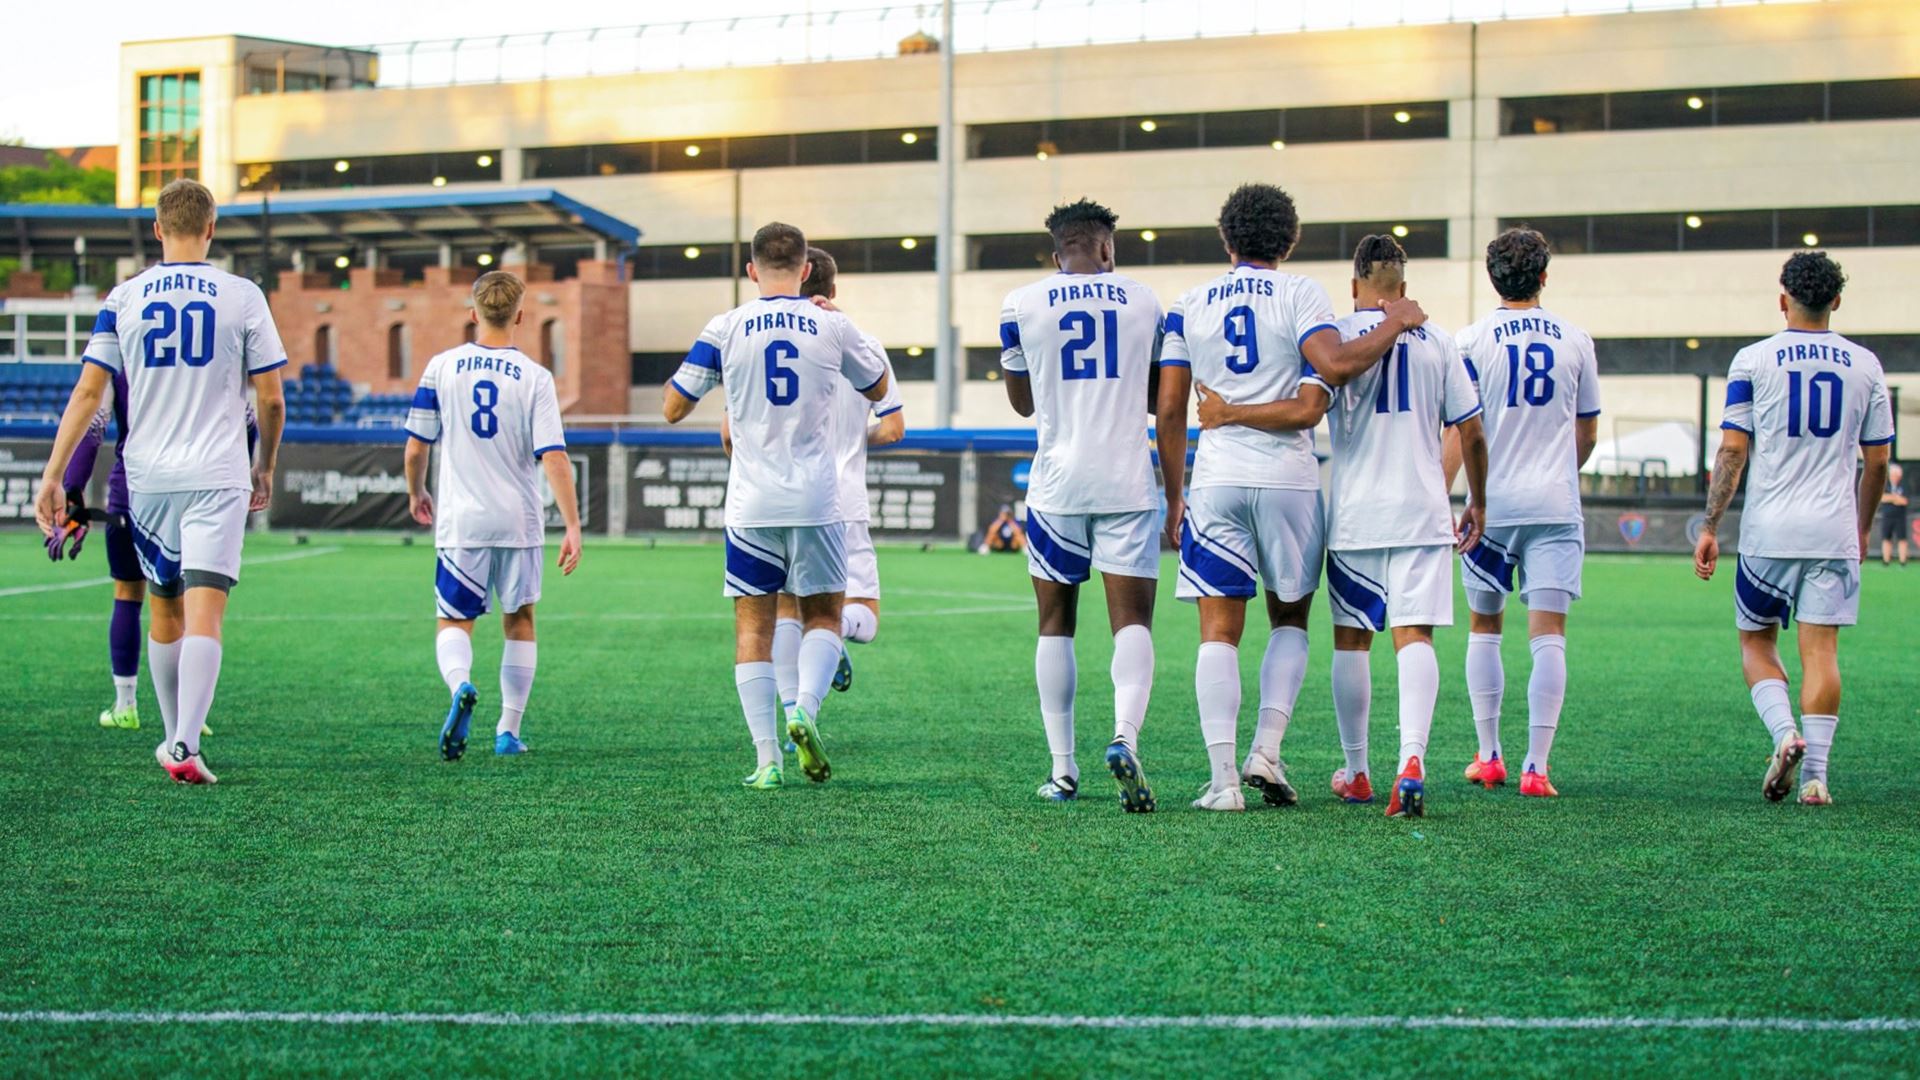 The Seton Hall men's soccer team walks onto the field during a game.